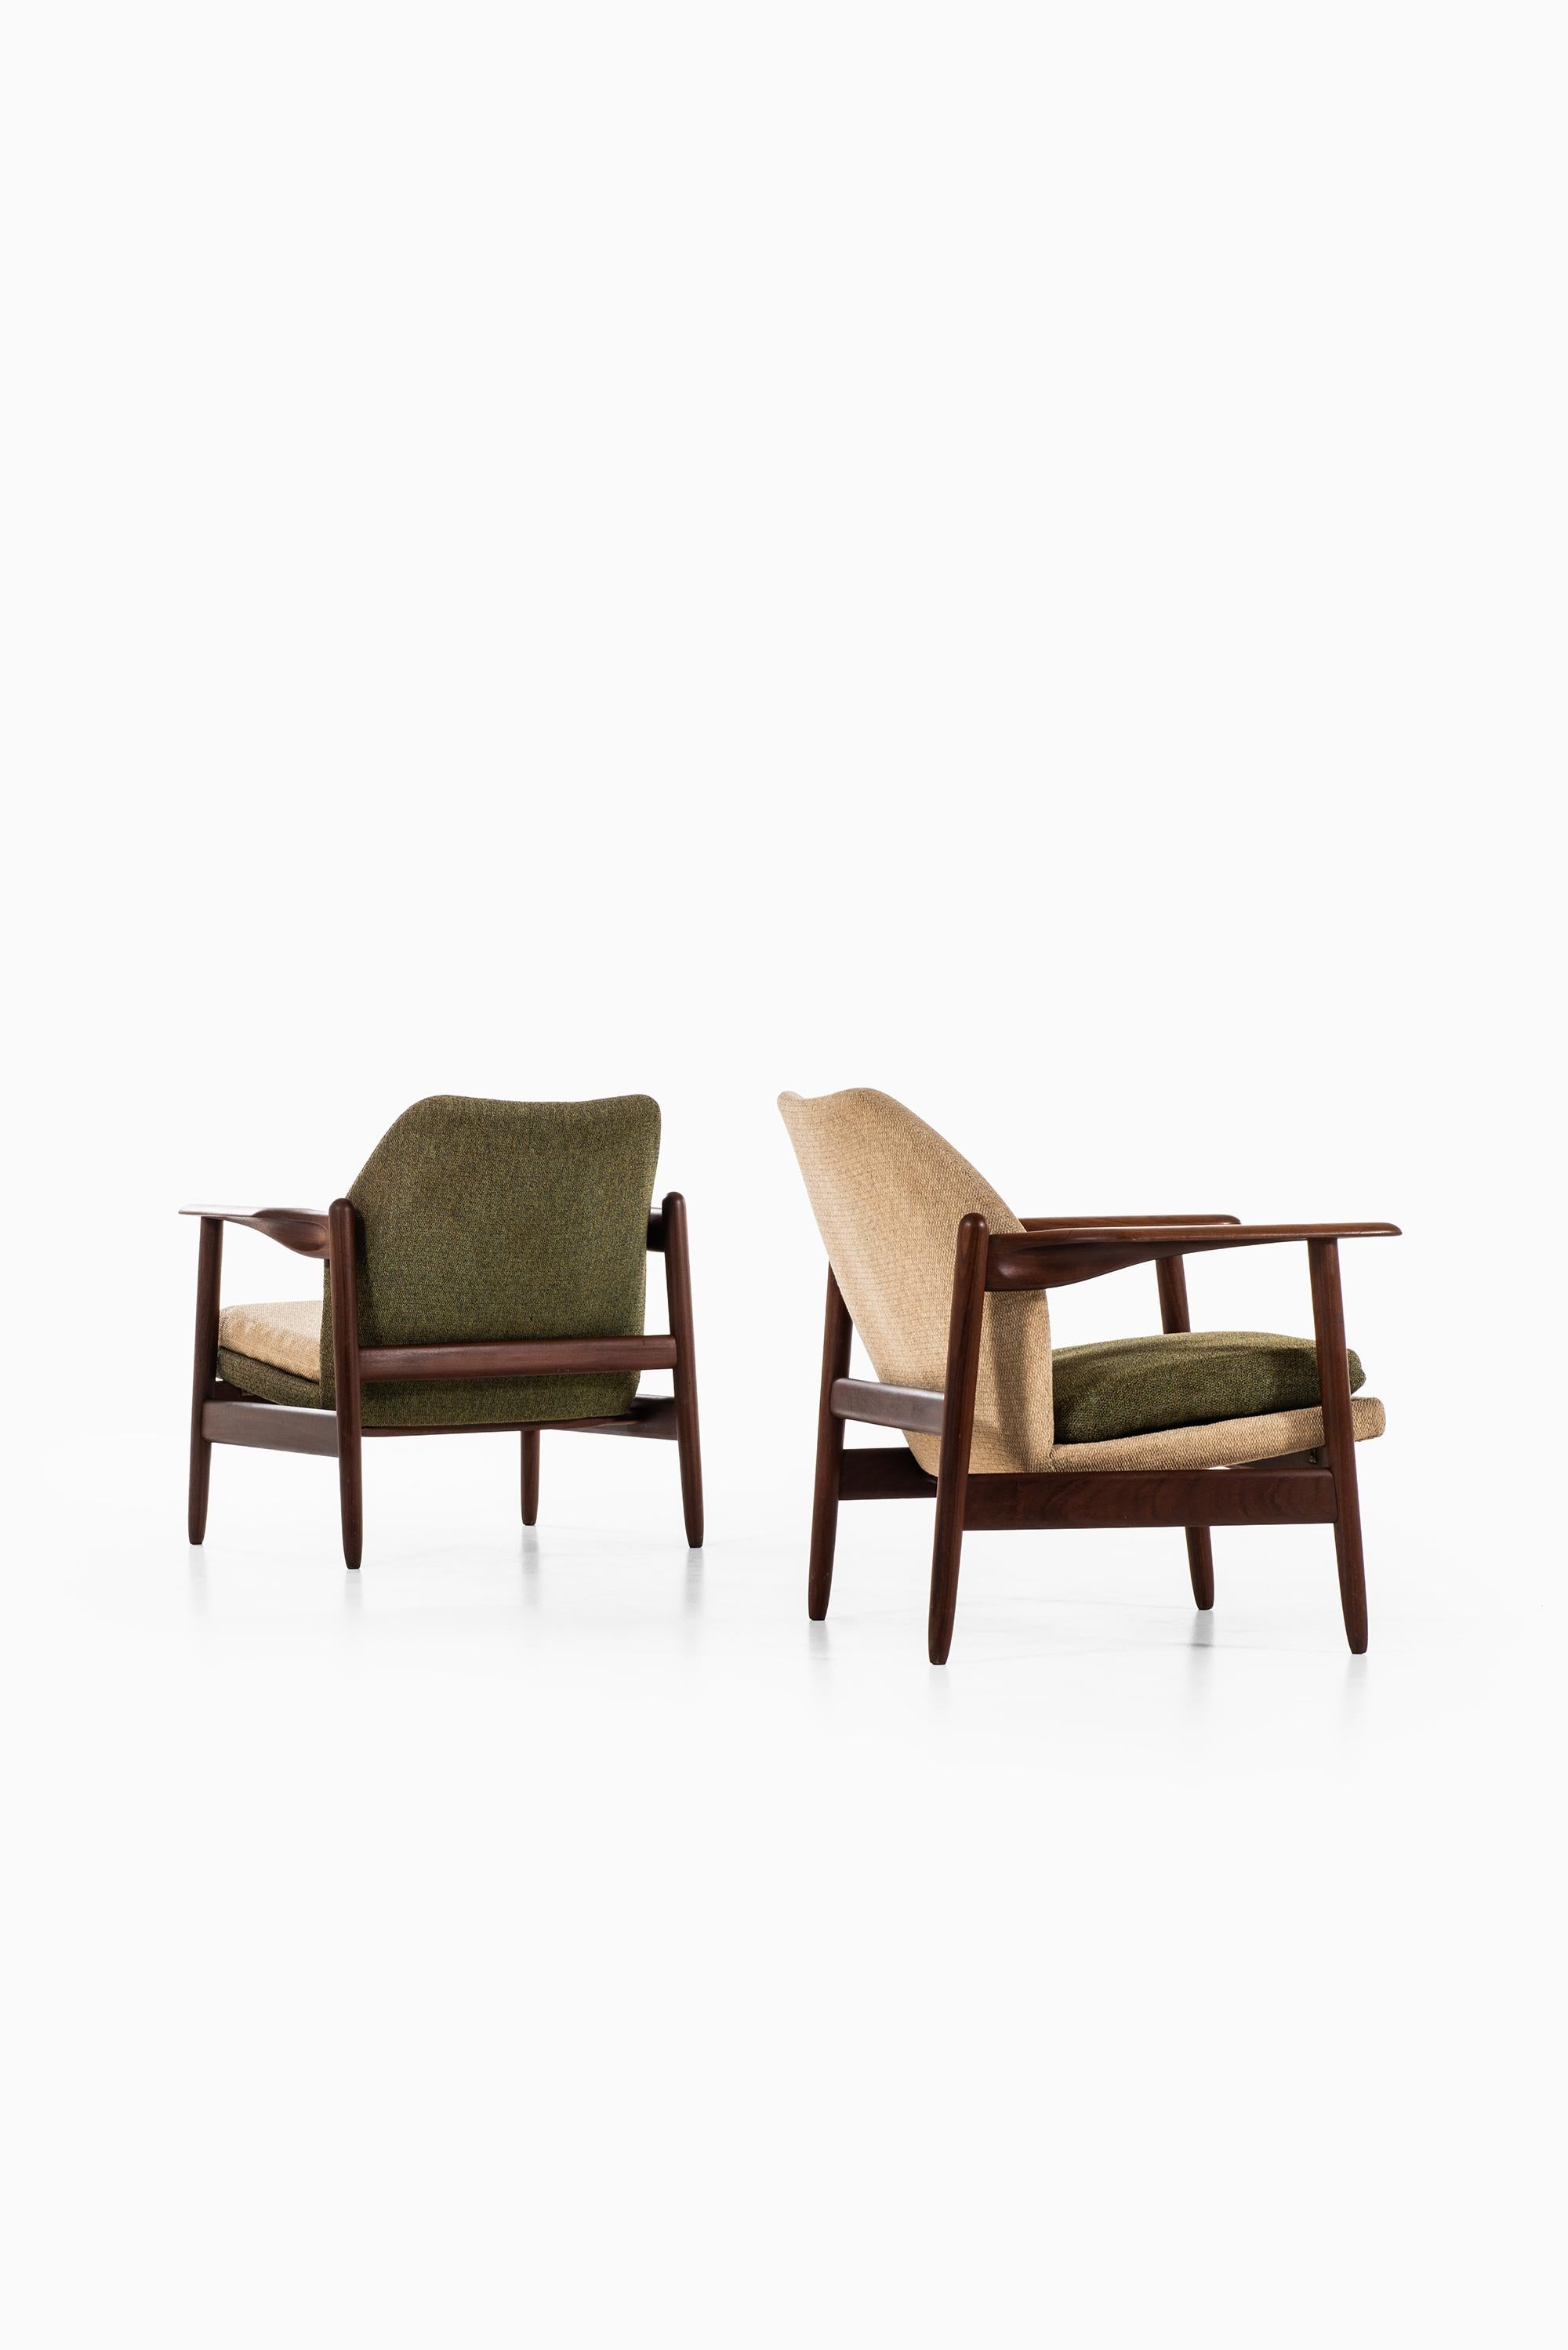 Mid-20th Century Pair of Easy Chairs Produced in Denmark